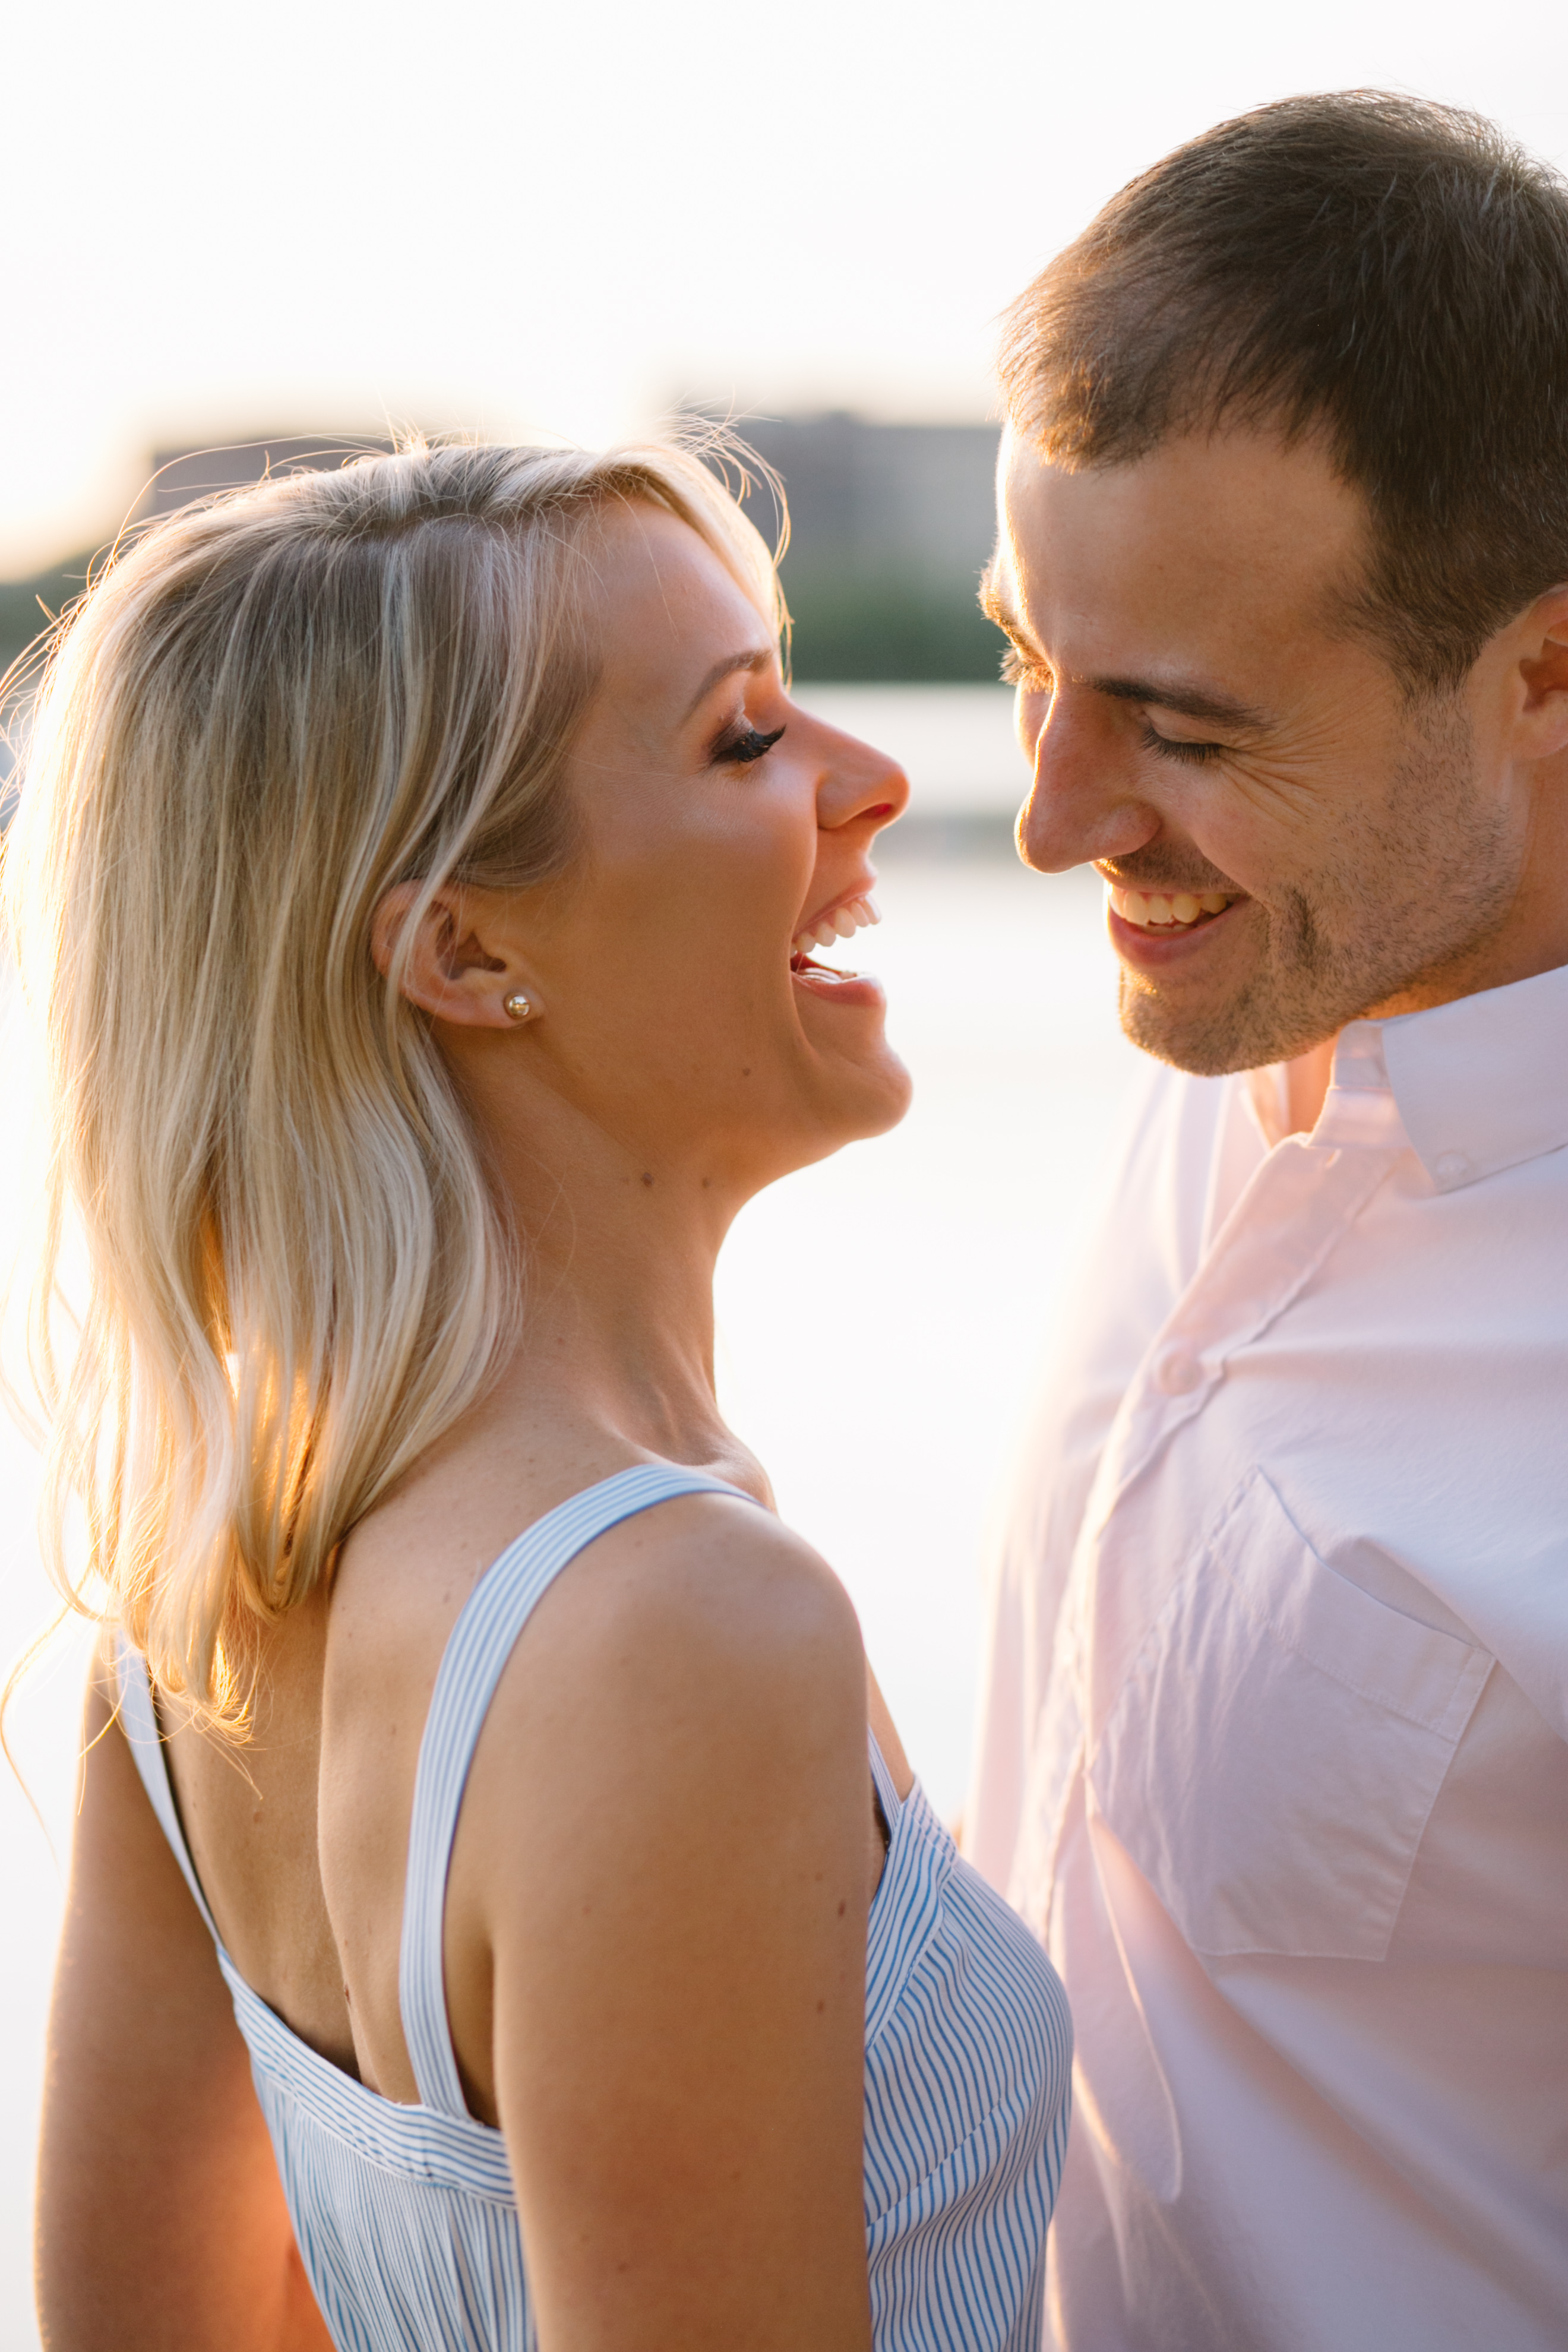 waterfront engagement session in minneapolis